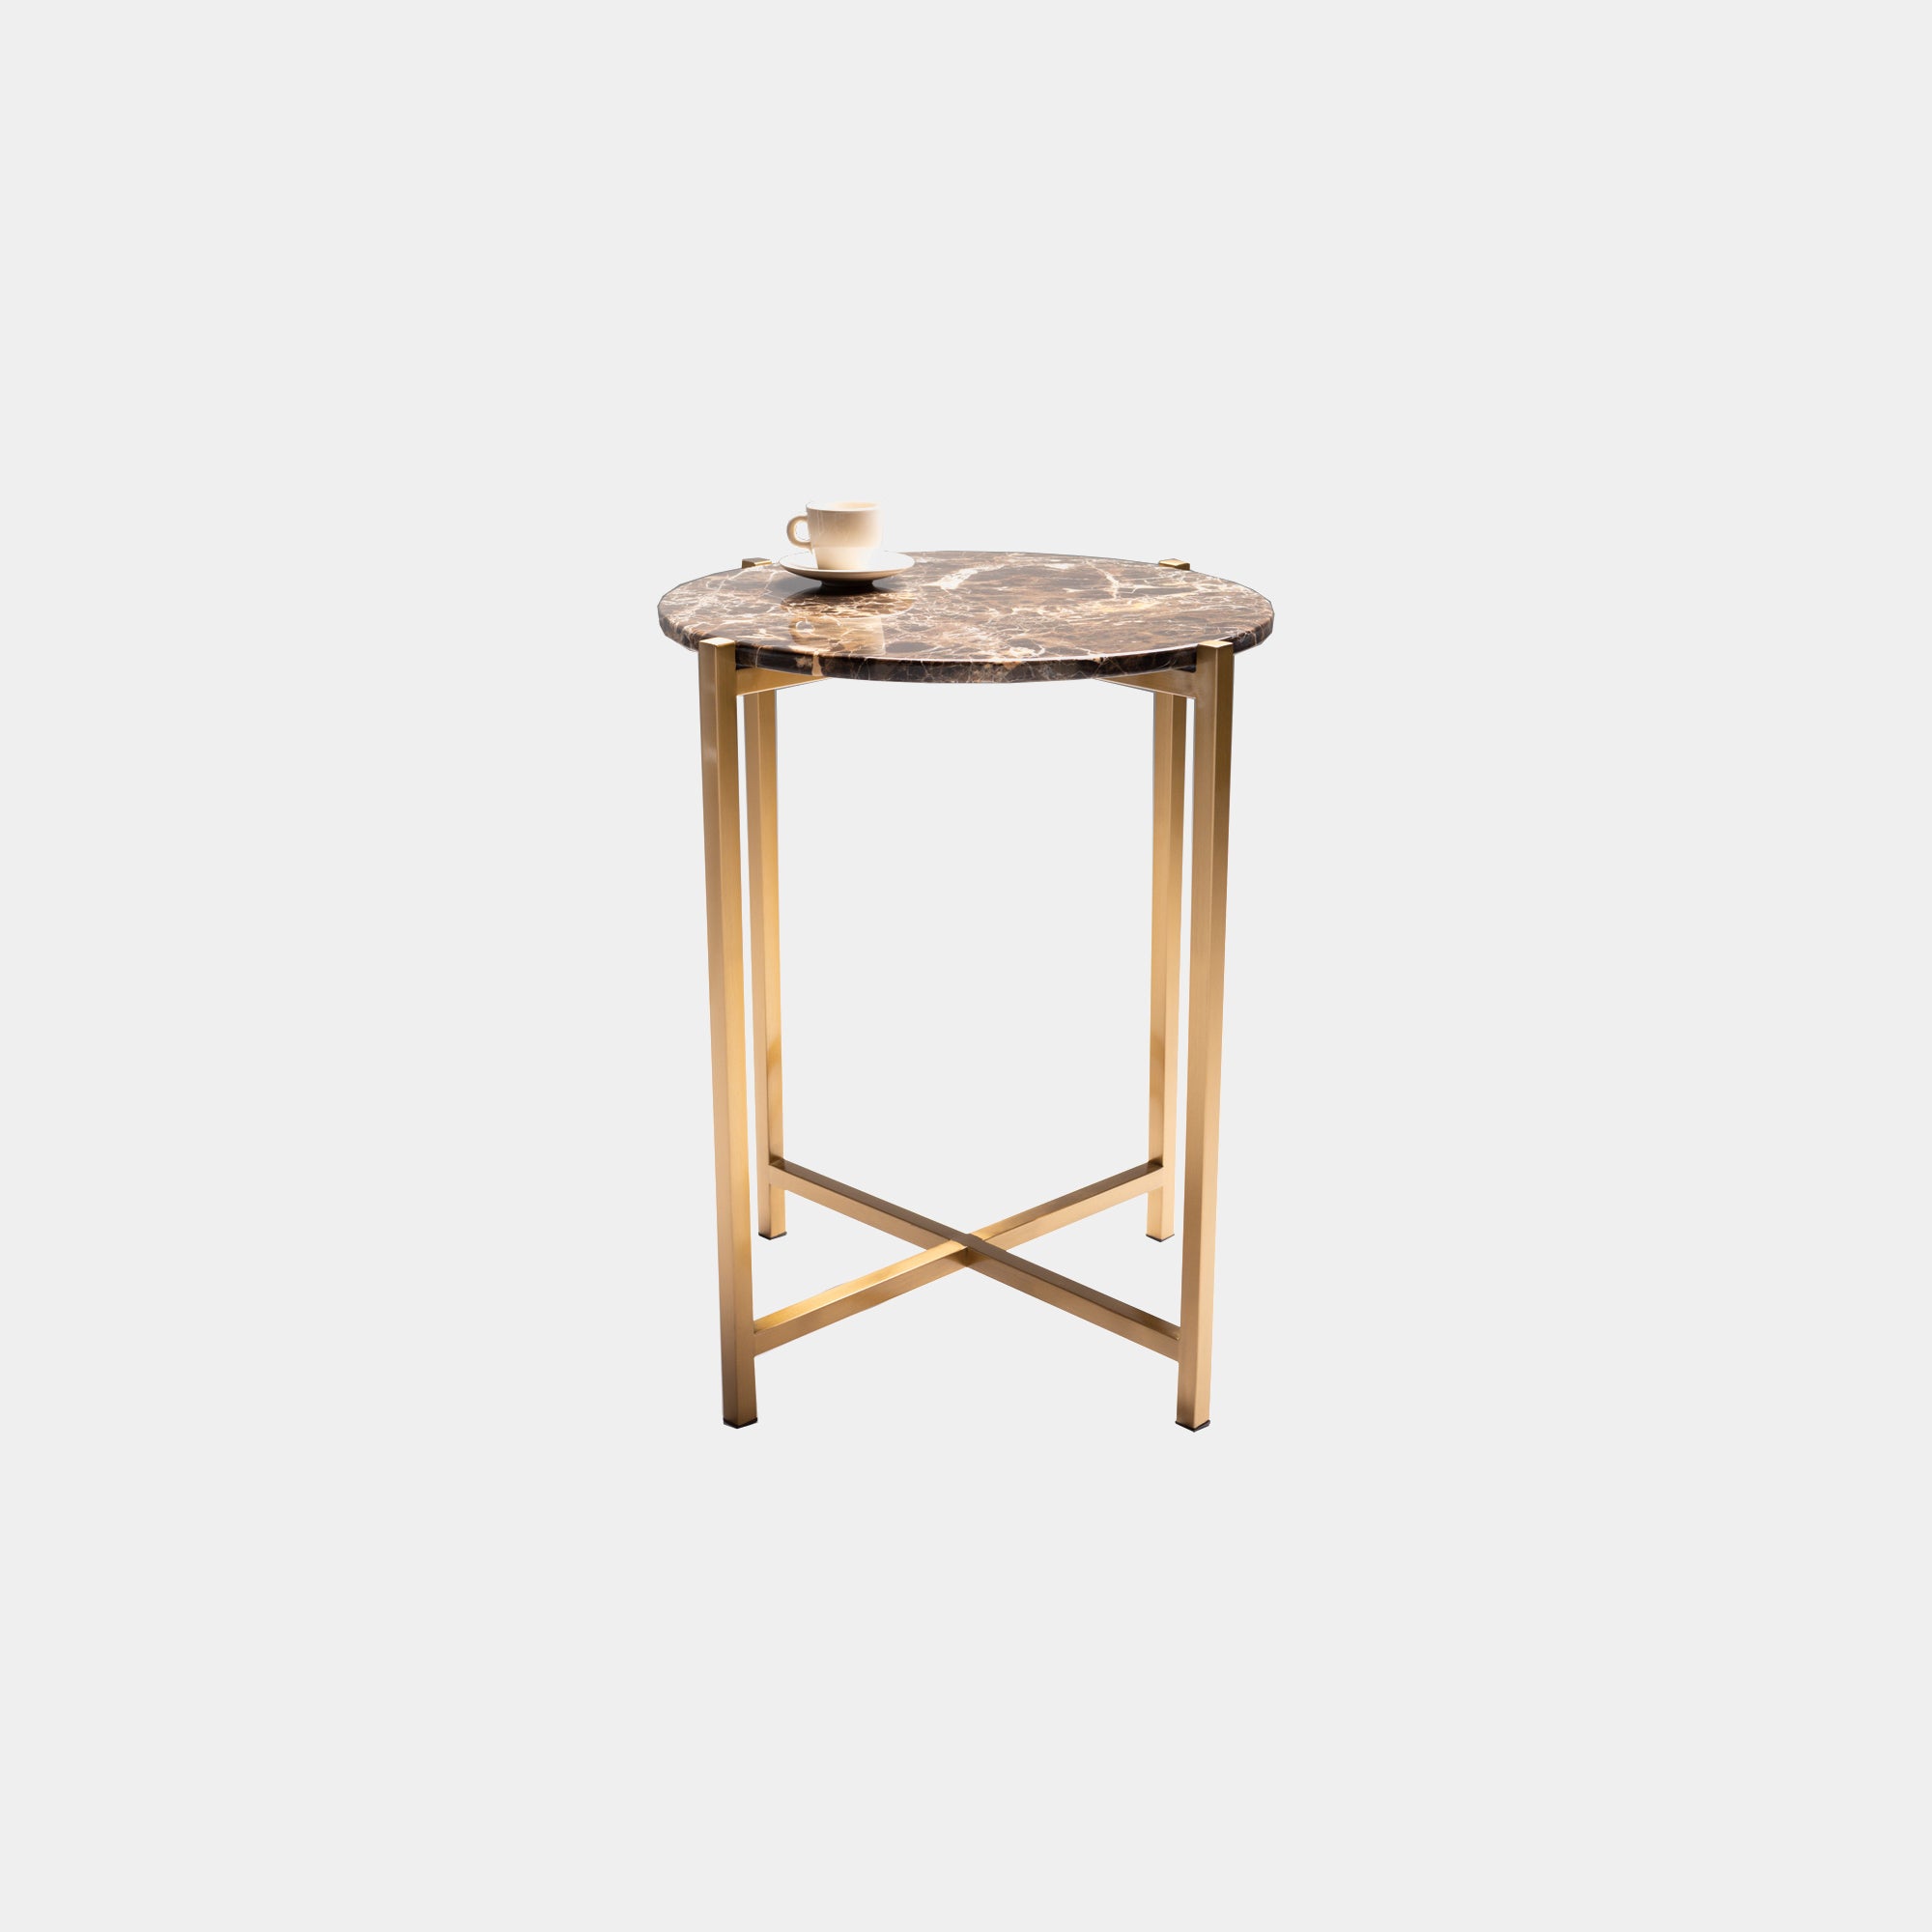 Venice - Circular Side Table In Dark Emporador With Brushed Brass Base